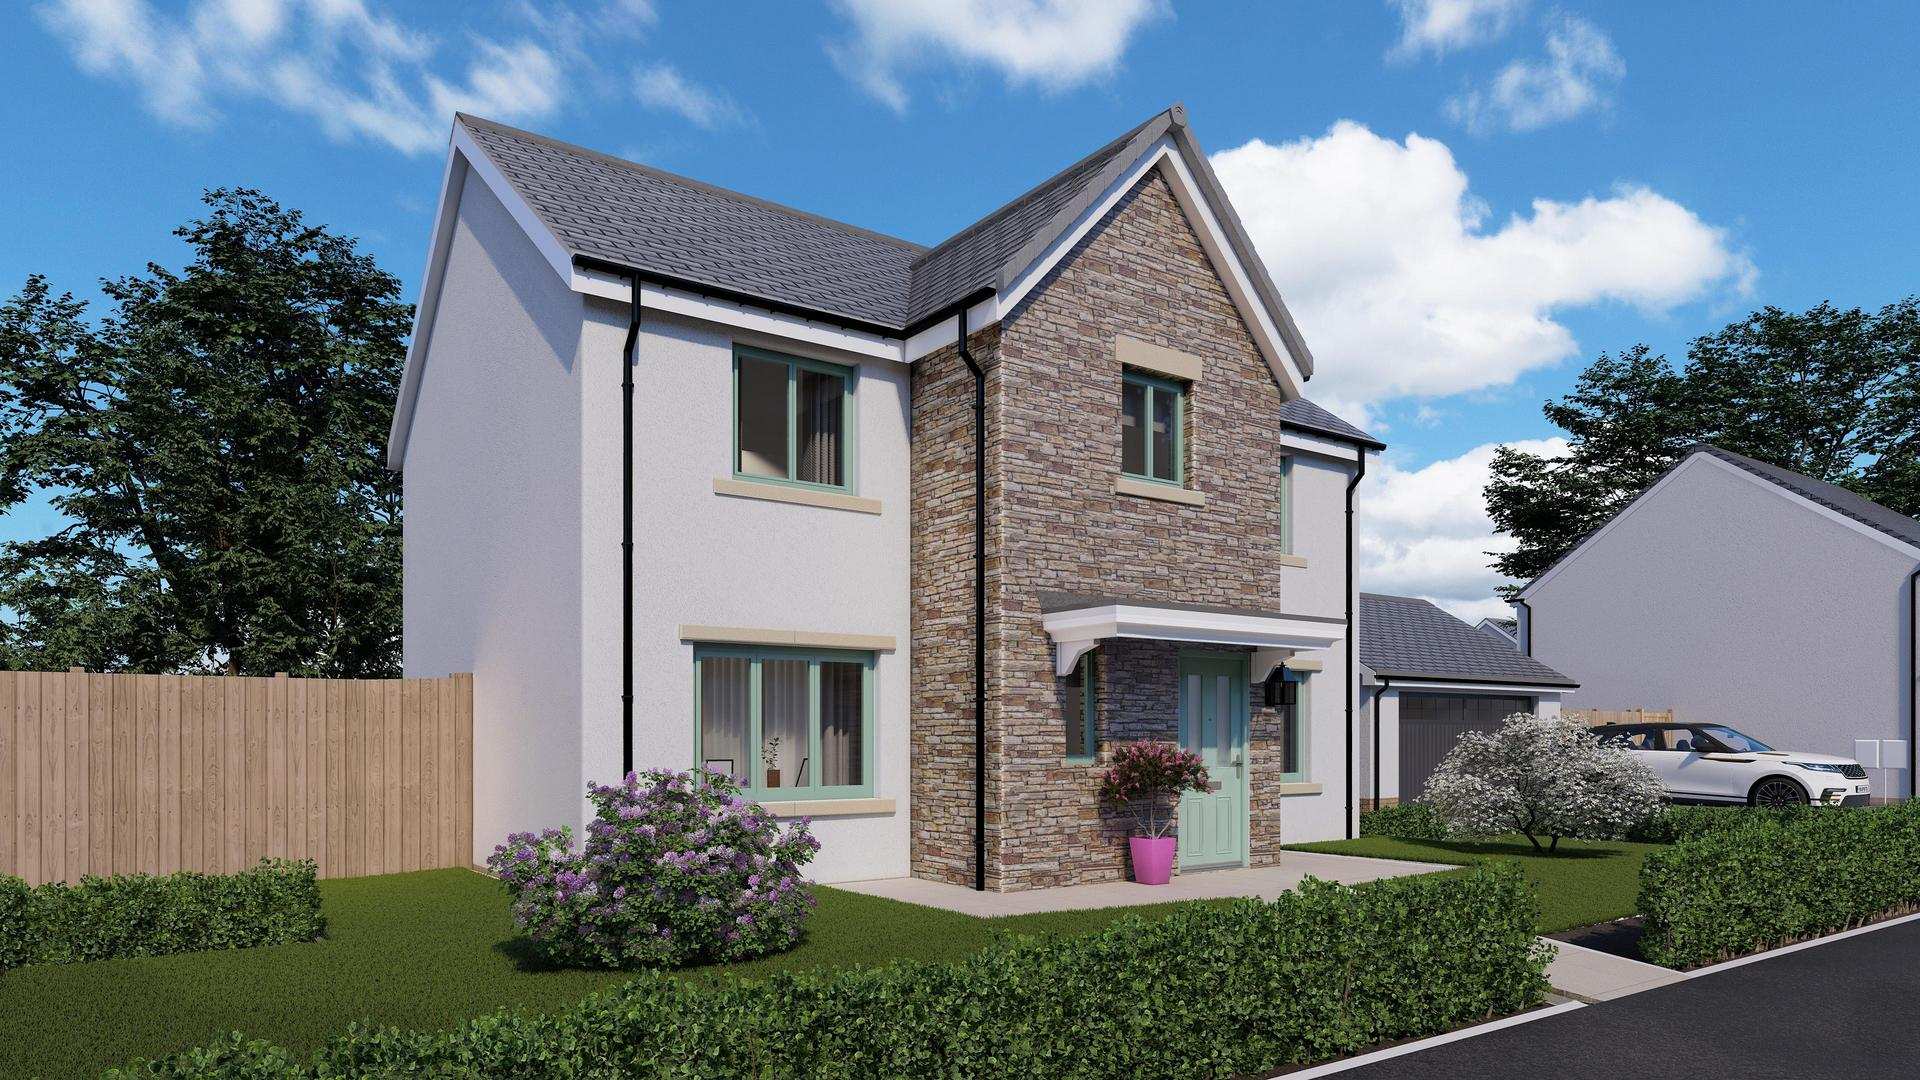 First Look at New Homes for Sale in South Molton